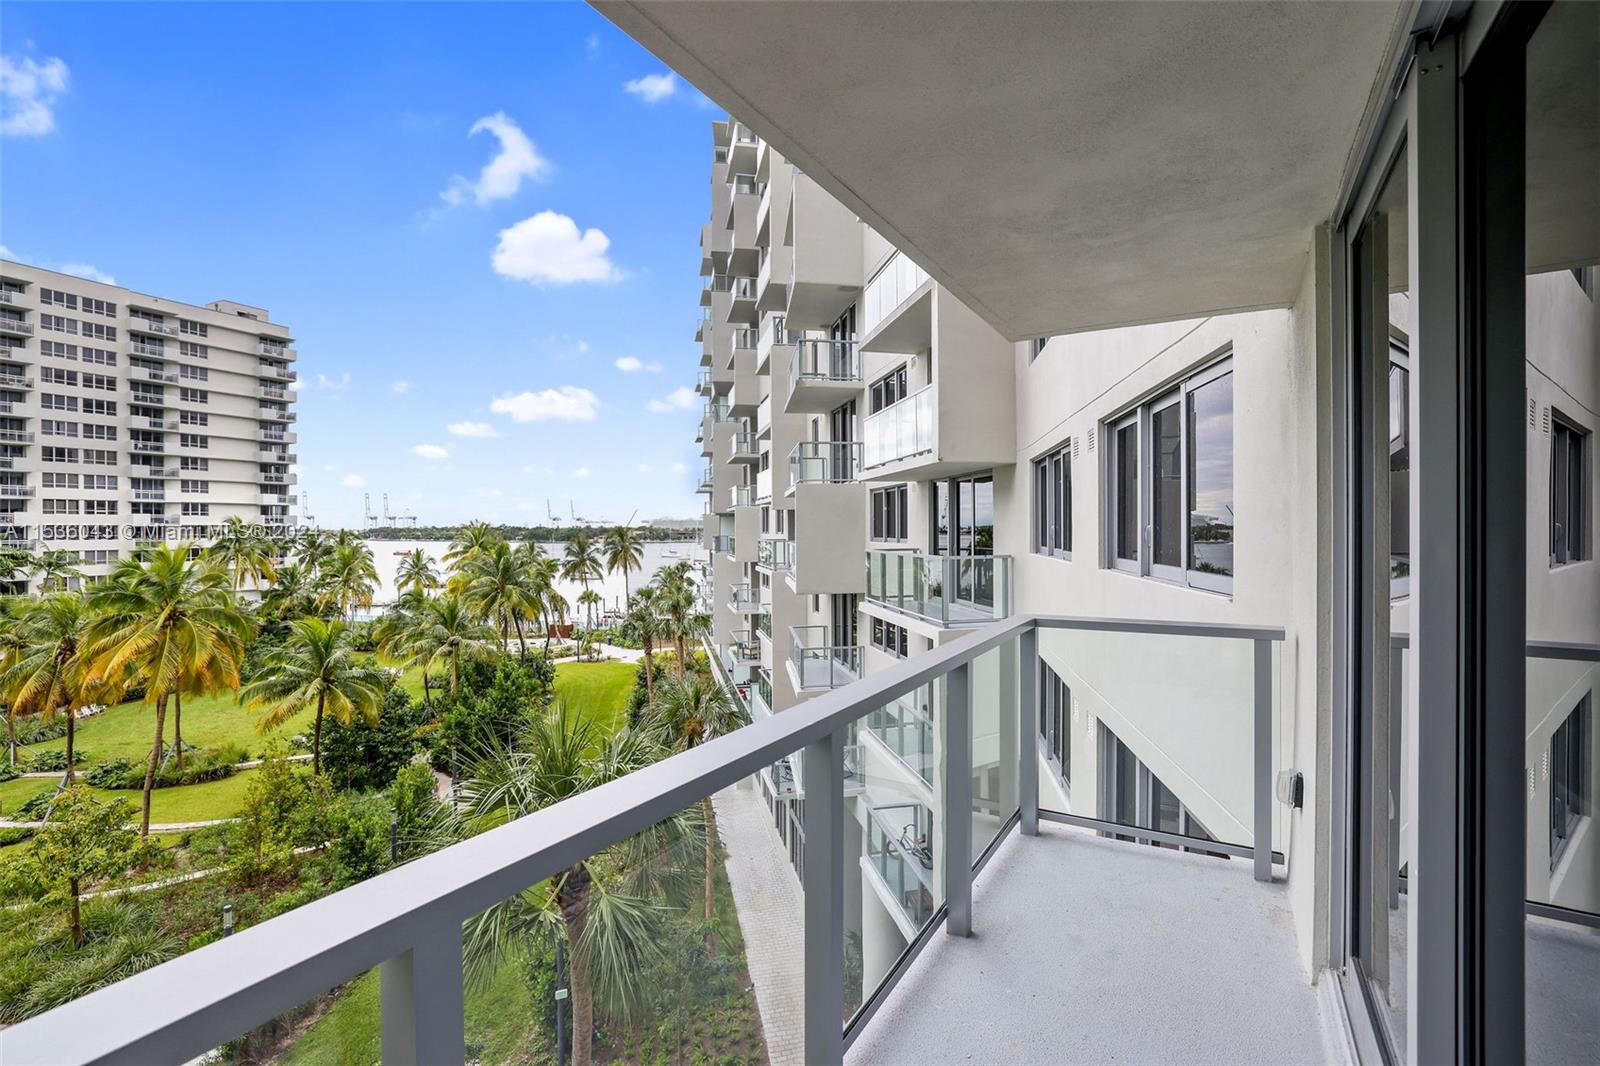 1500 Bay Rd N-1023, Miami Beach, Florida 33139, 1 Bedroom Bedrooms, ,1 BathroomBathrooms,Residentiallease,For Rent,1500 Bay Rd N-1023,A11536043